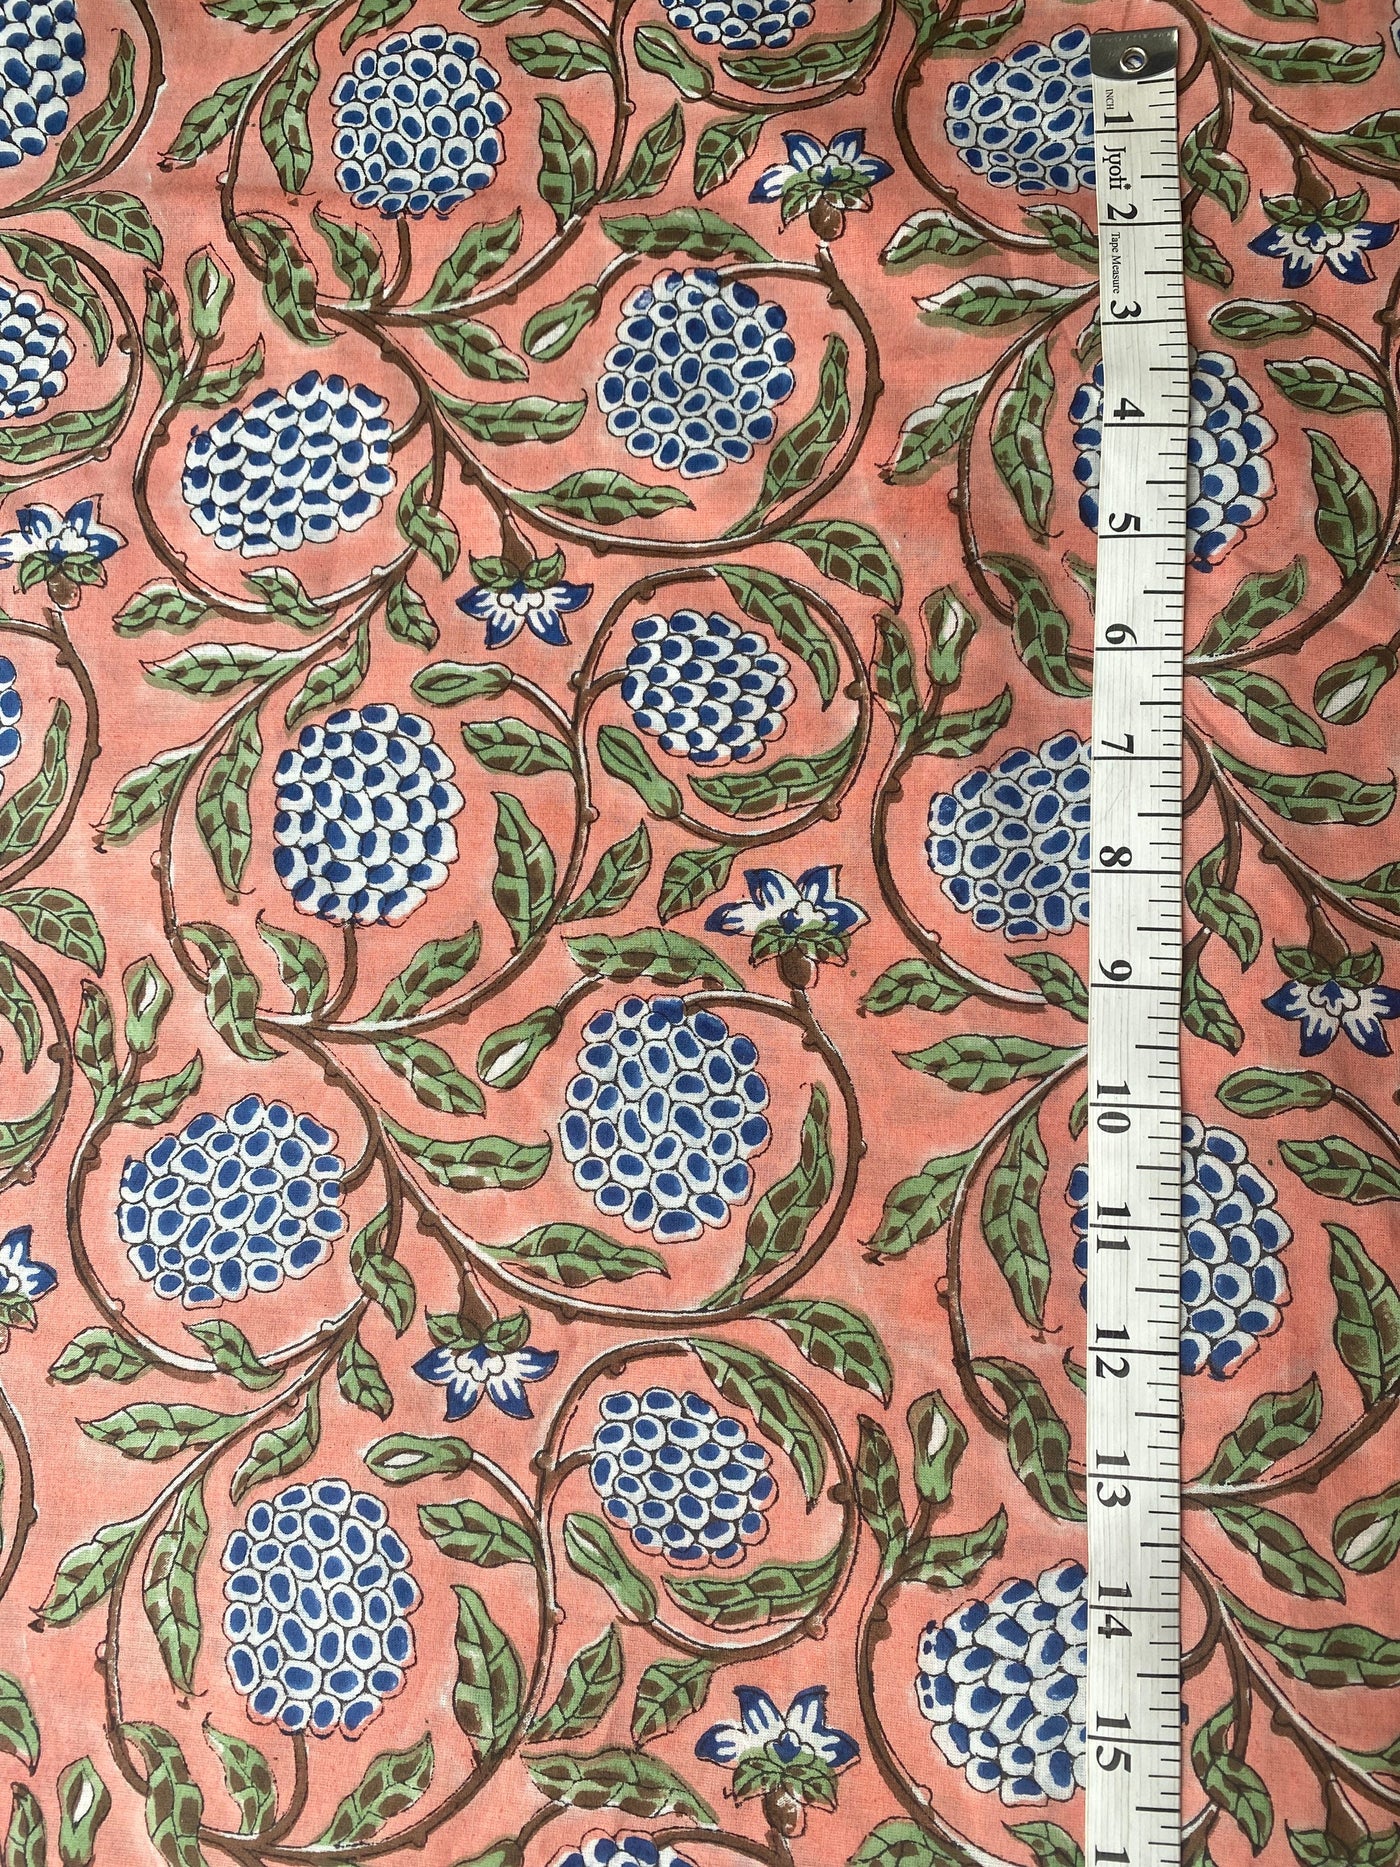 Dark Salmon Pink, Sage Green, Delft Blue Indian Floral Hand Block Printed 100% Cotton Cloth, Fabric by the Yard, Fabric for Curtains Pillows